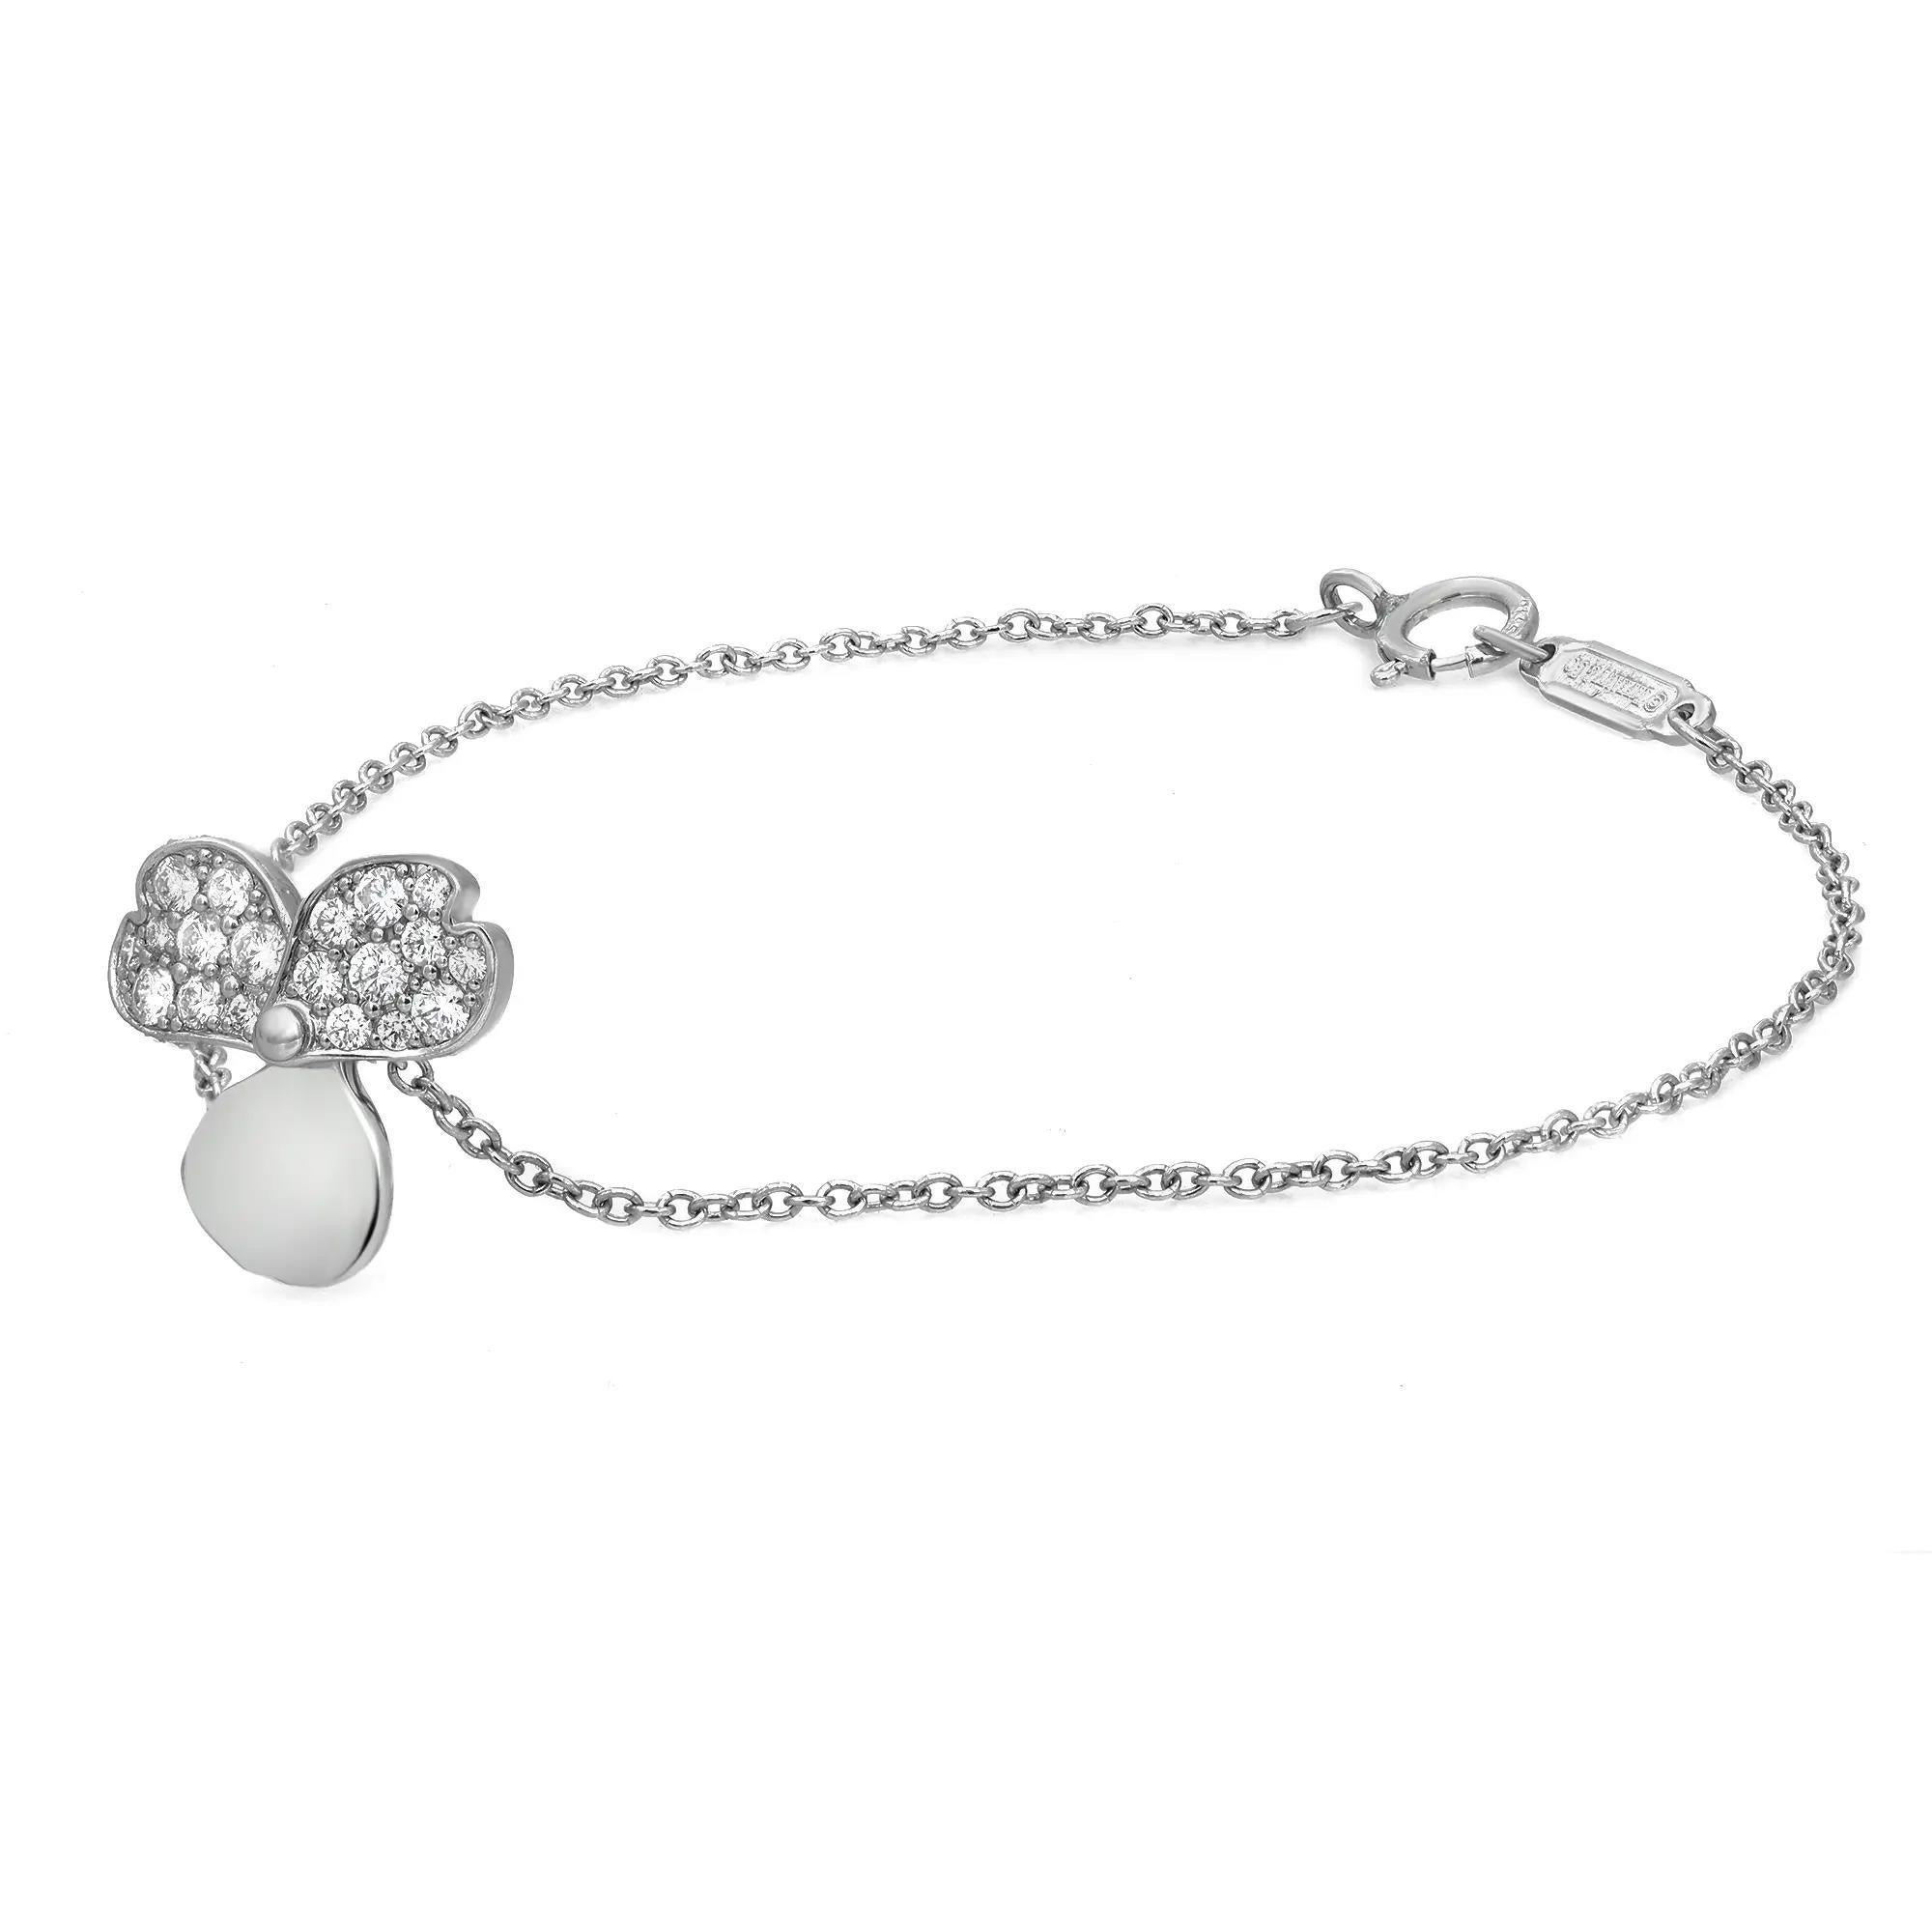 Sleek and modern Tiffany & Co. Paper Flowers diamond chain bracelet. Crafted in lustrous platinum. This bracelet features a center flower charm studded with round brilliant cut diamonds on two petals. Total diamond weight: 0.17 carat. Bracelet